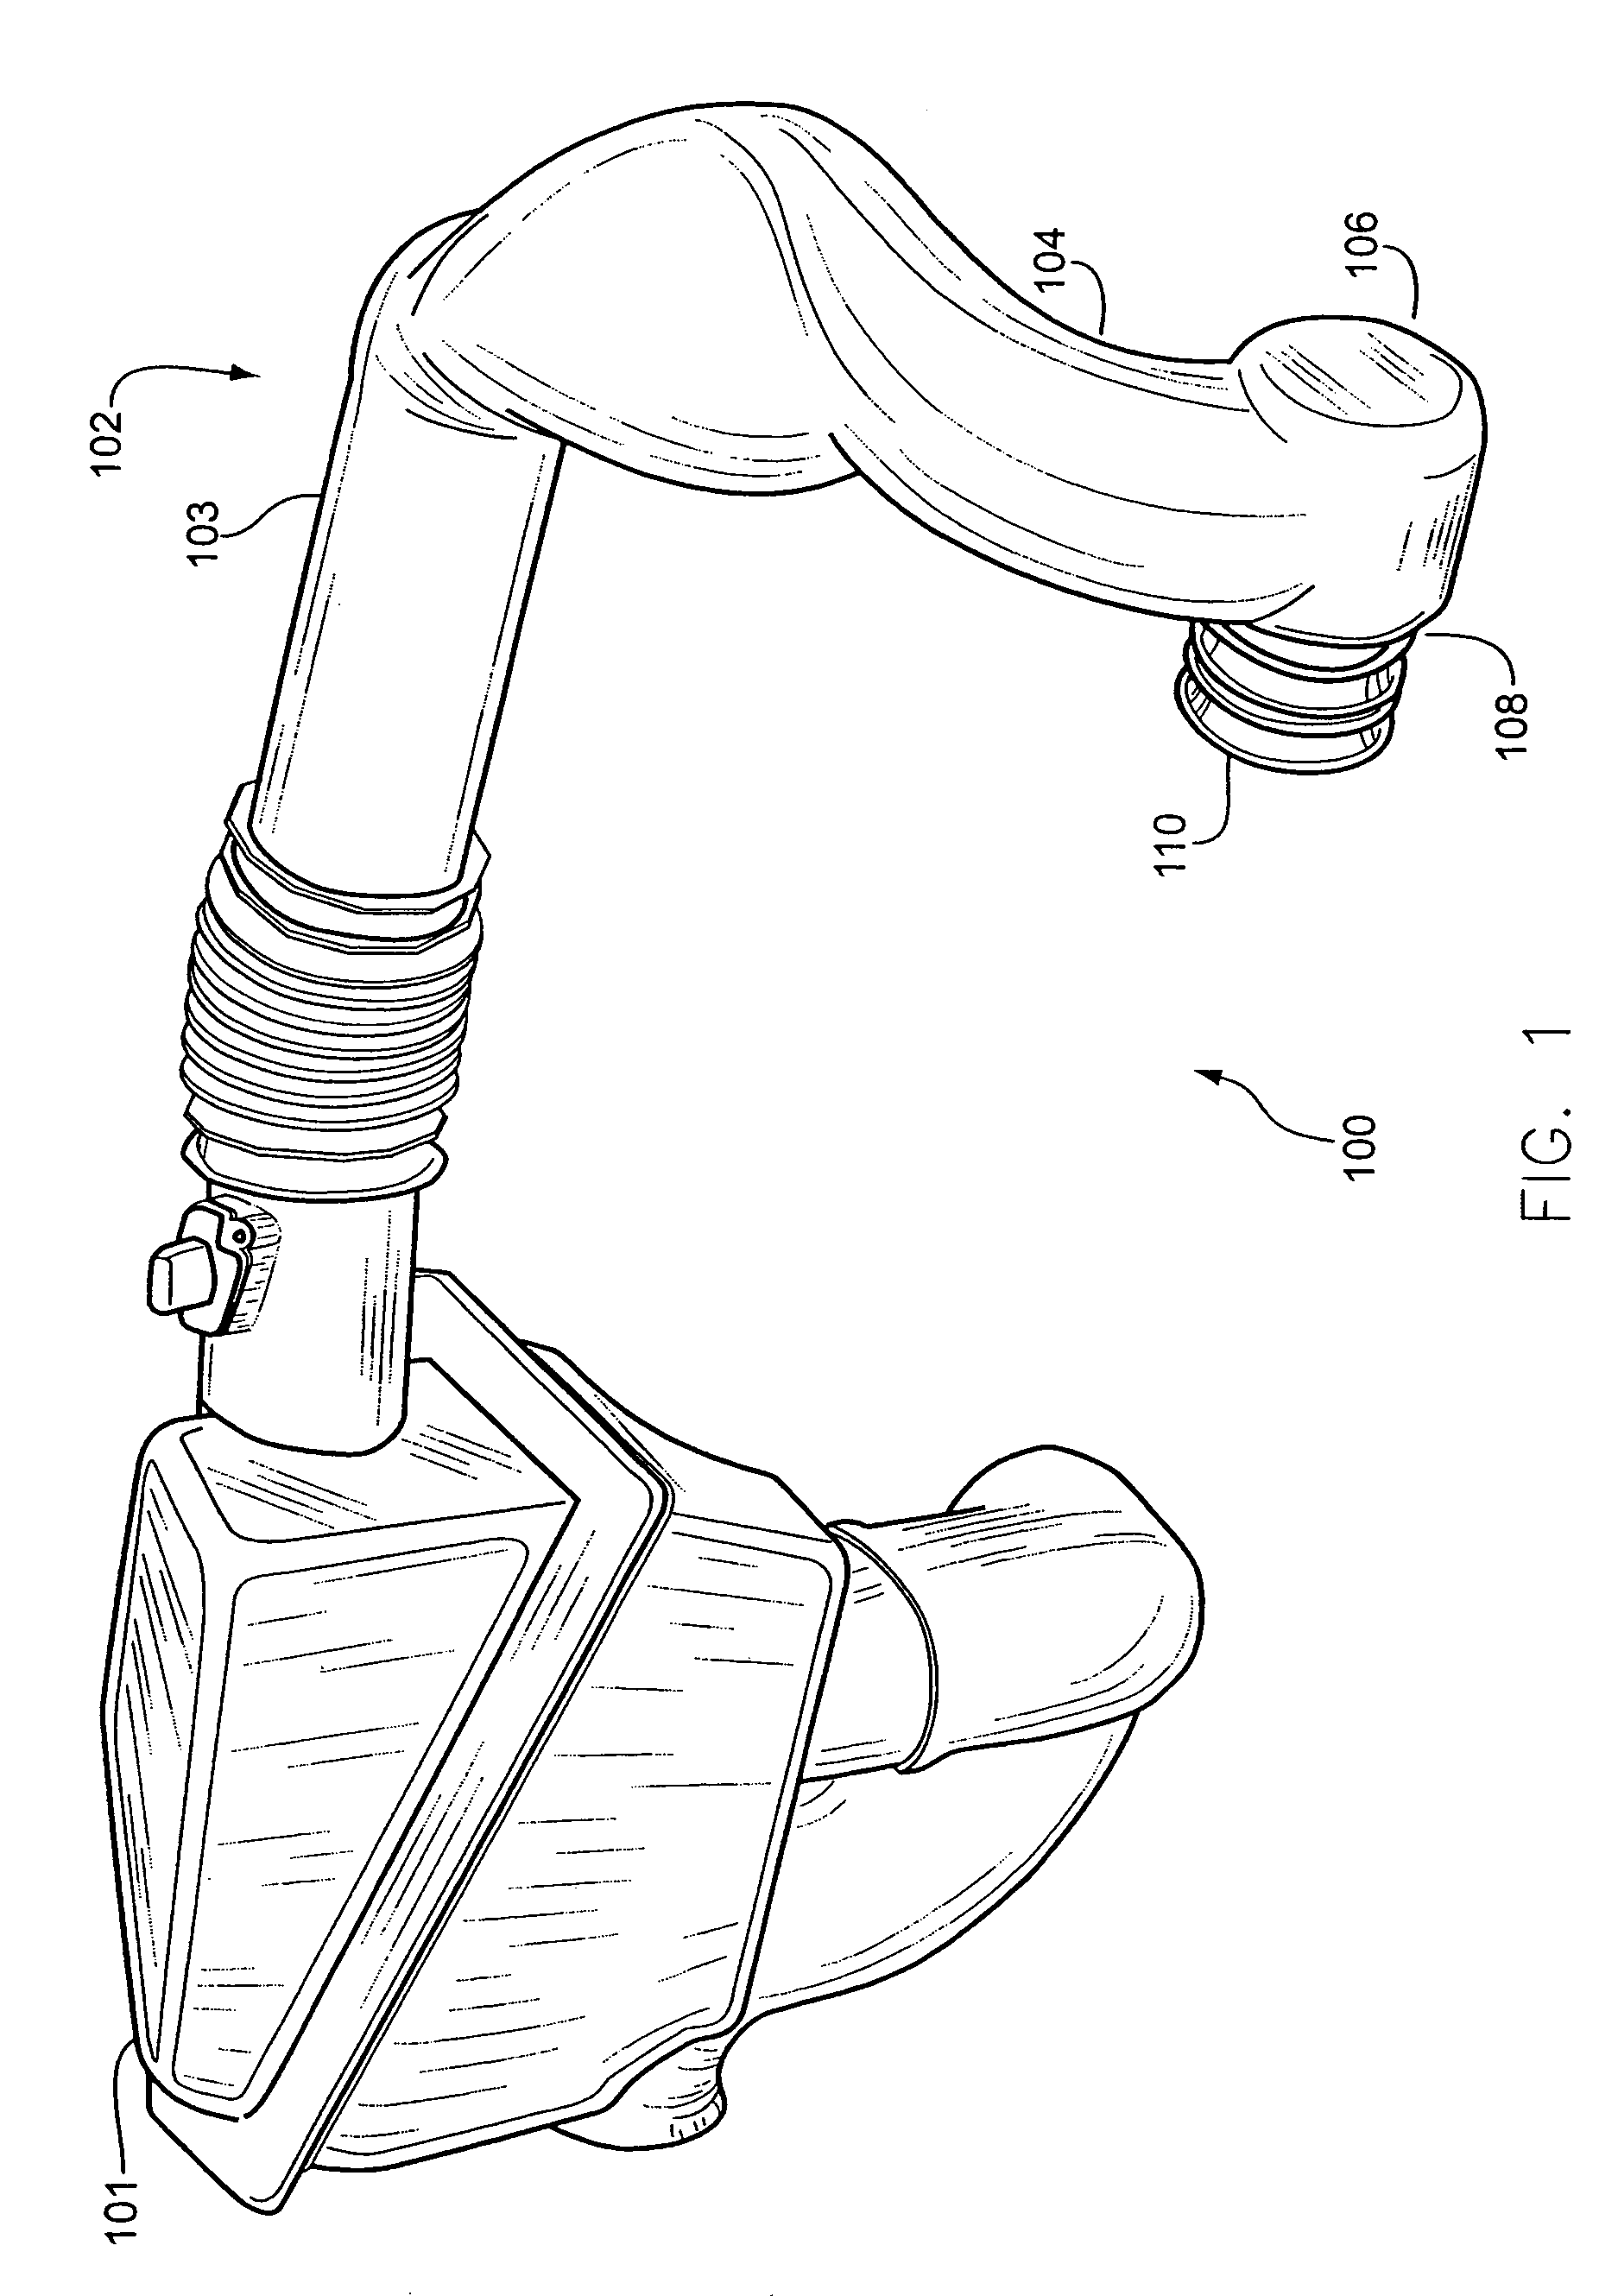 Apparatus for increasing induction air flow rate to a turbocharger